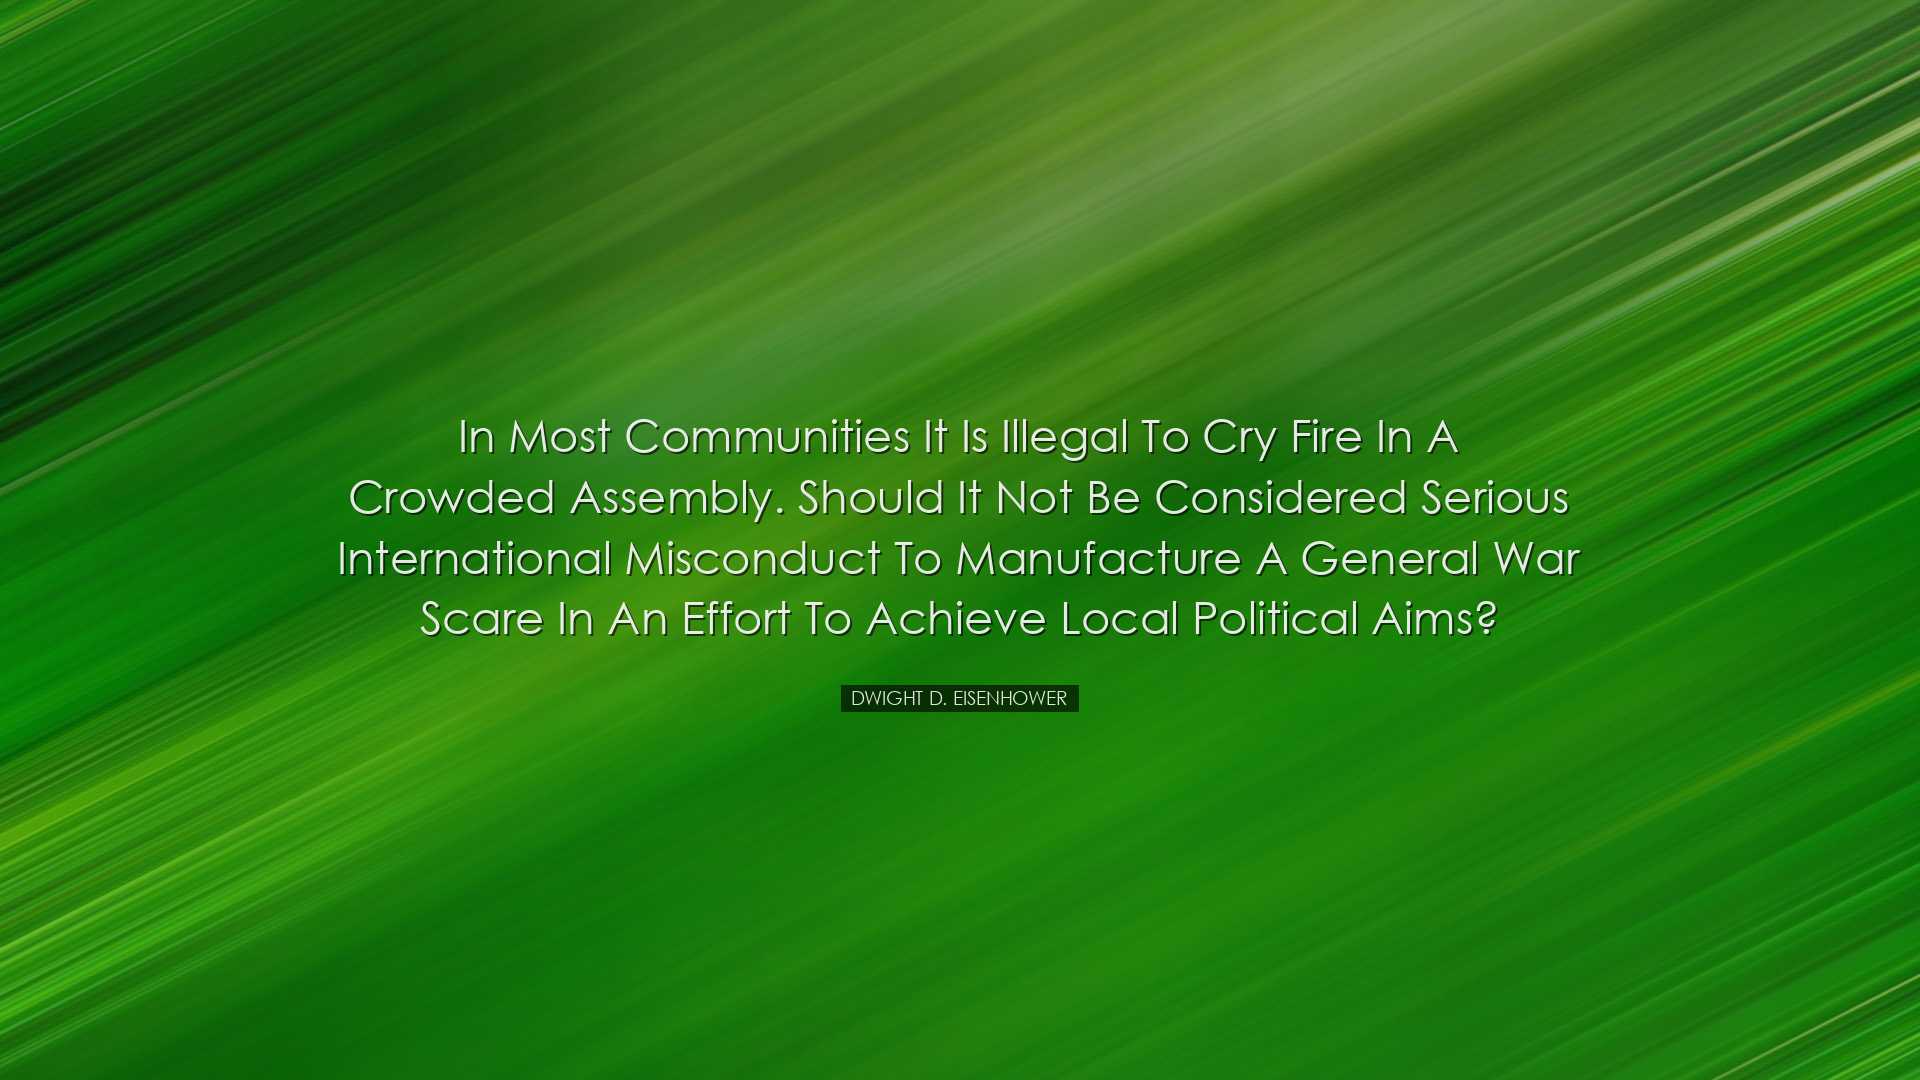 In most communities it is illegal to cry fire in a crowded assembl